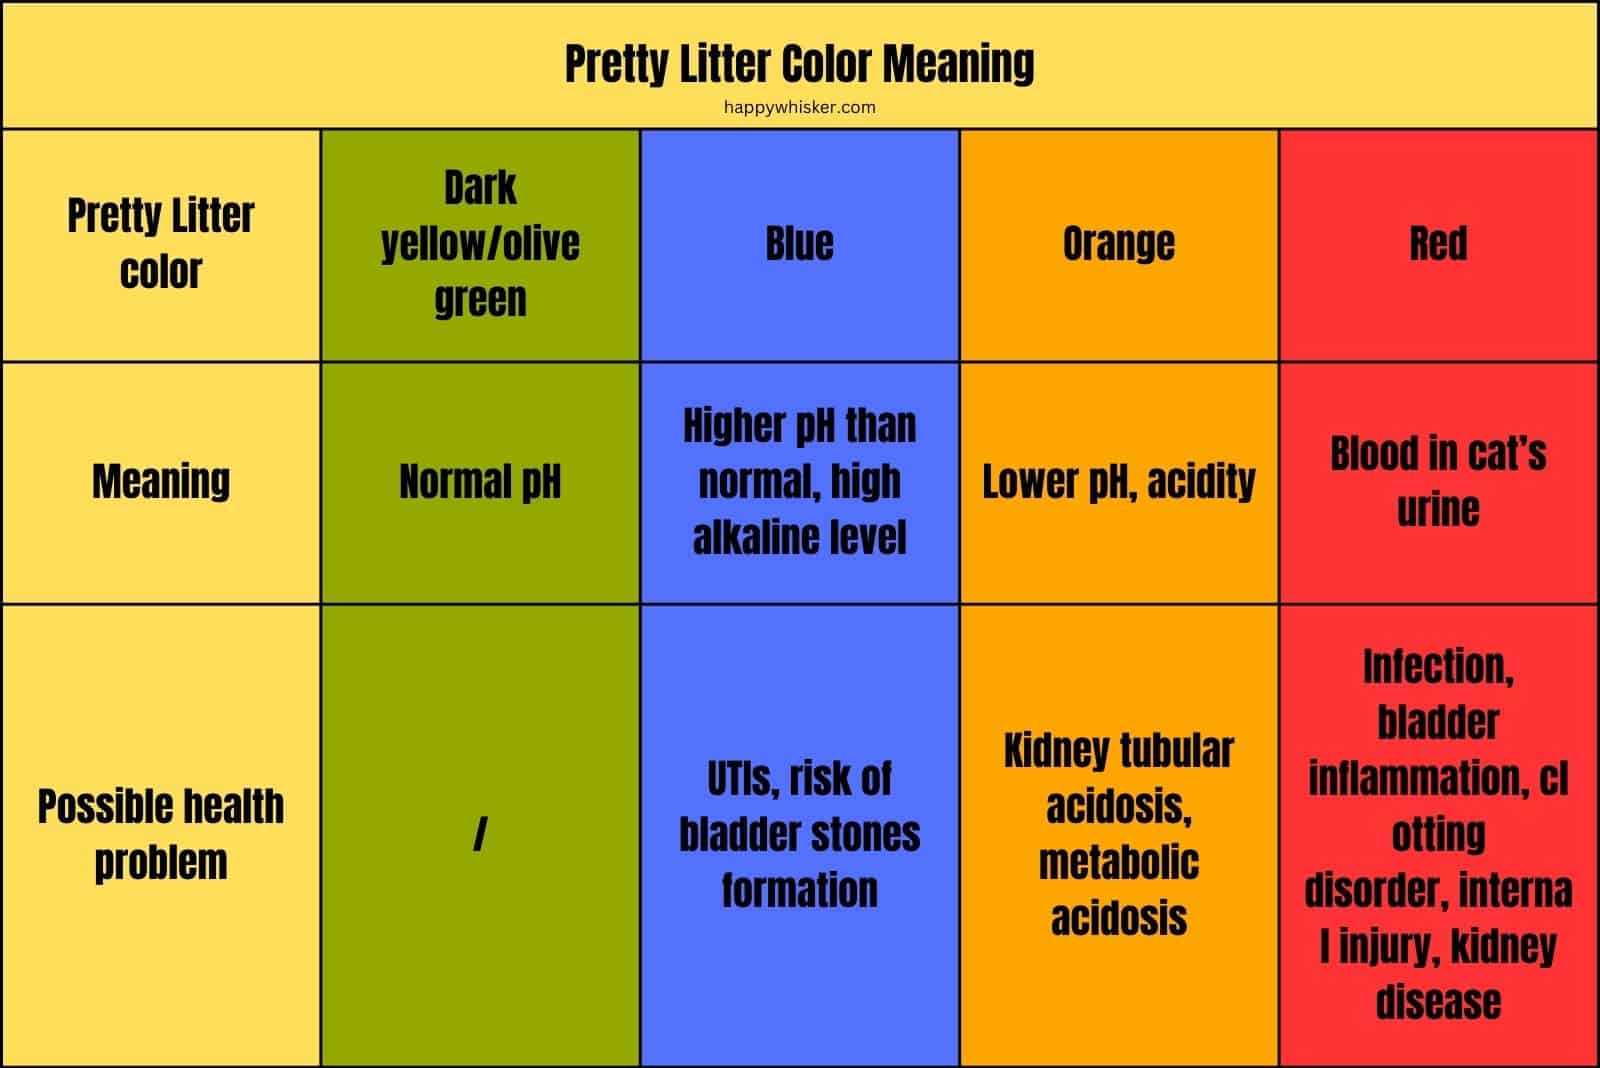 Pretty Litter Color Meaning table